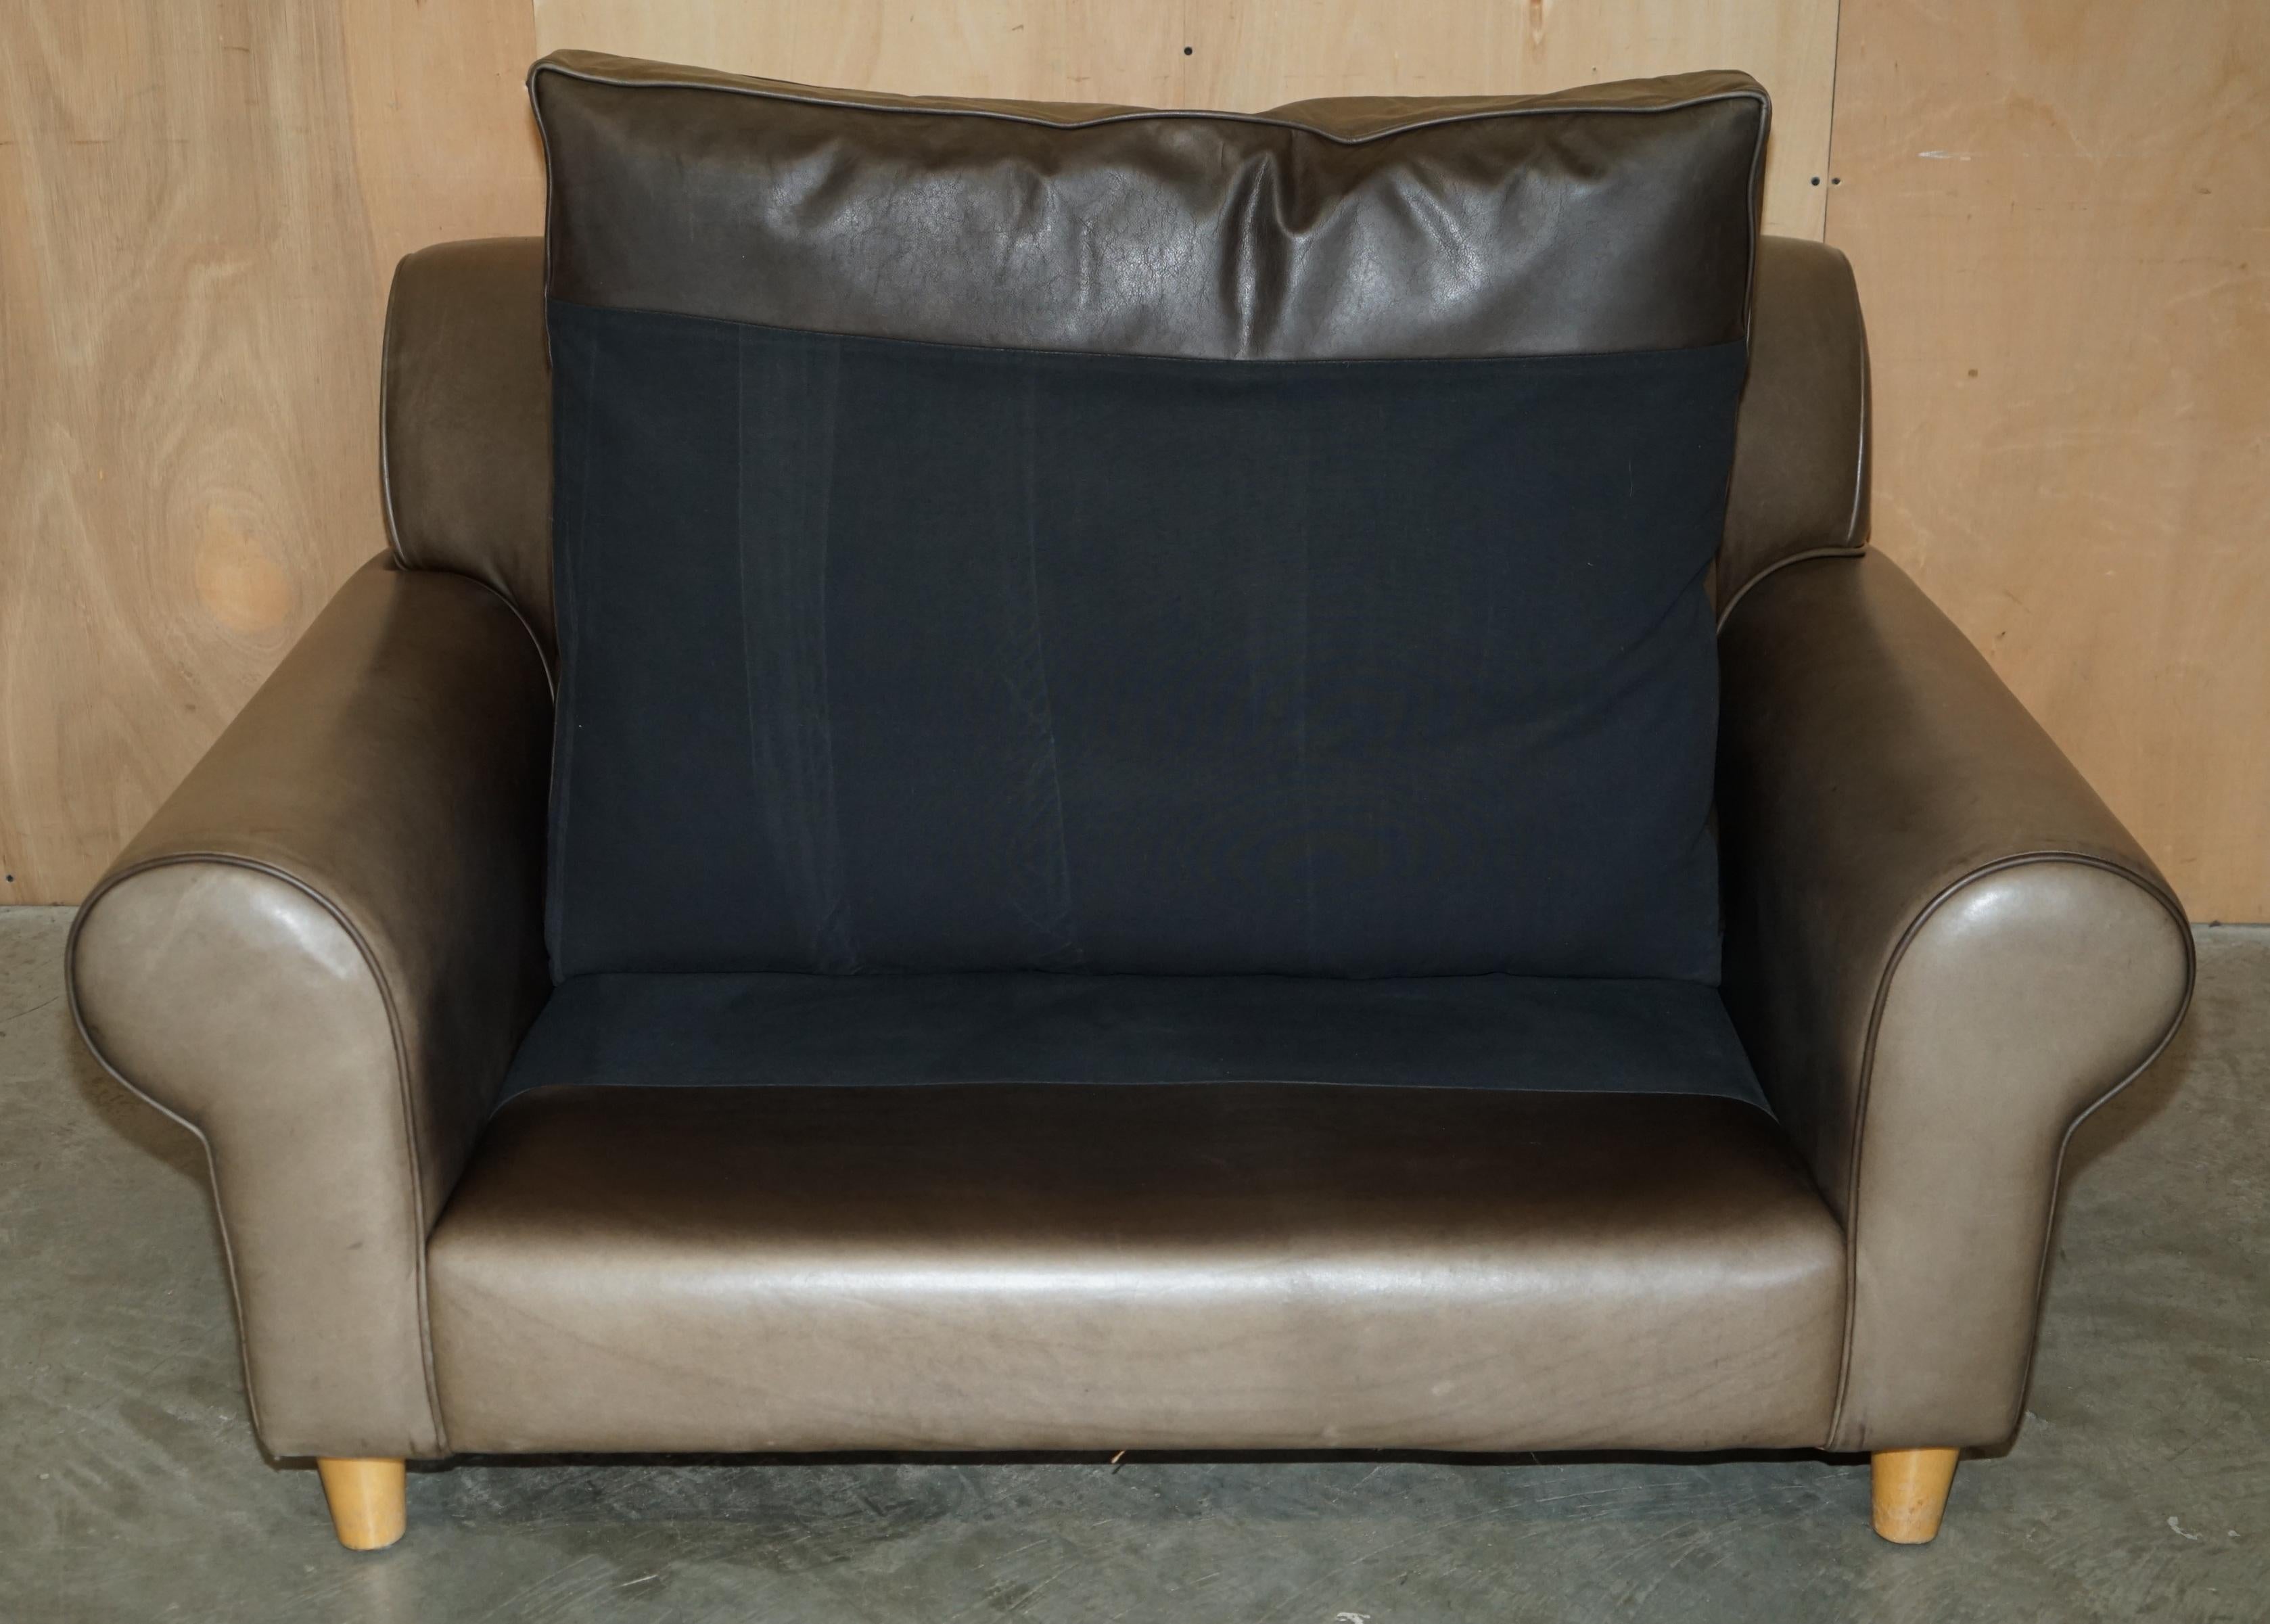 STUNNING TERENCE CONRAN GREY LEATHER LARGE LOVESEAT ARMCHAiR SOFA en vente 5